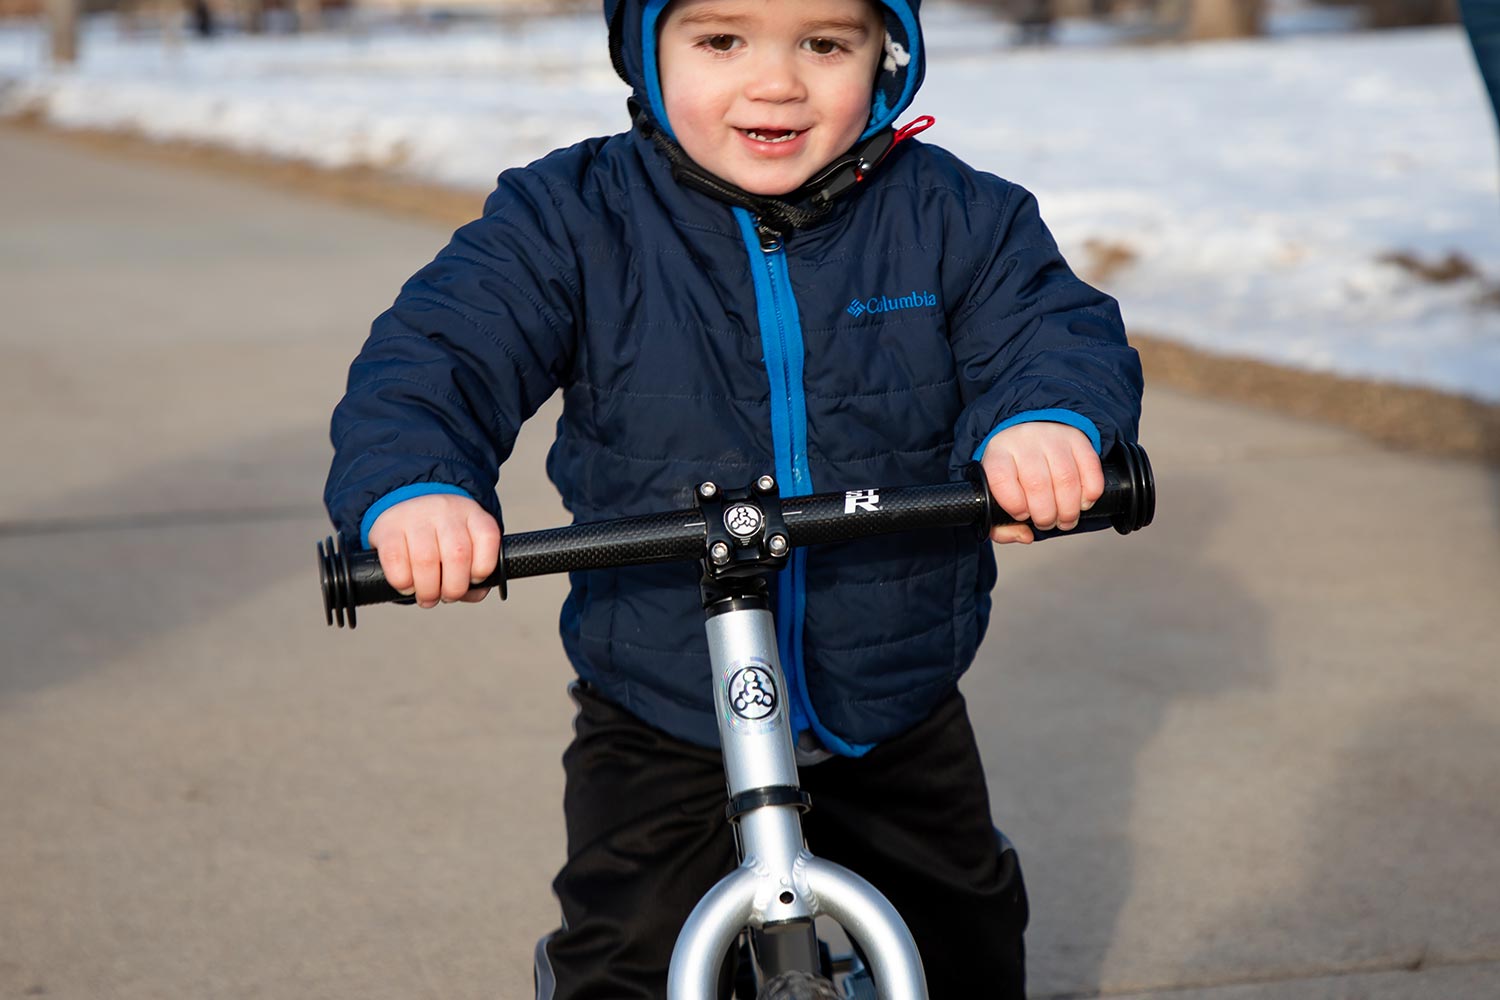 A young boy in a blue coat on a bike with an ST-R carbon fiber handlebar